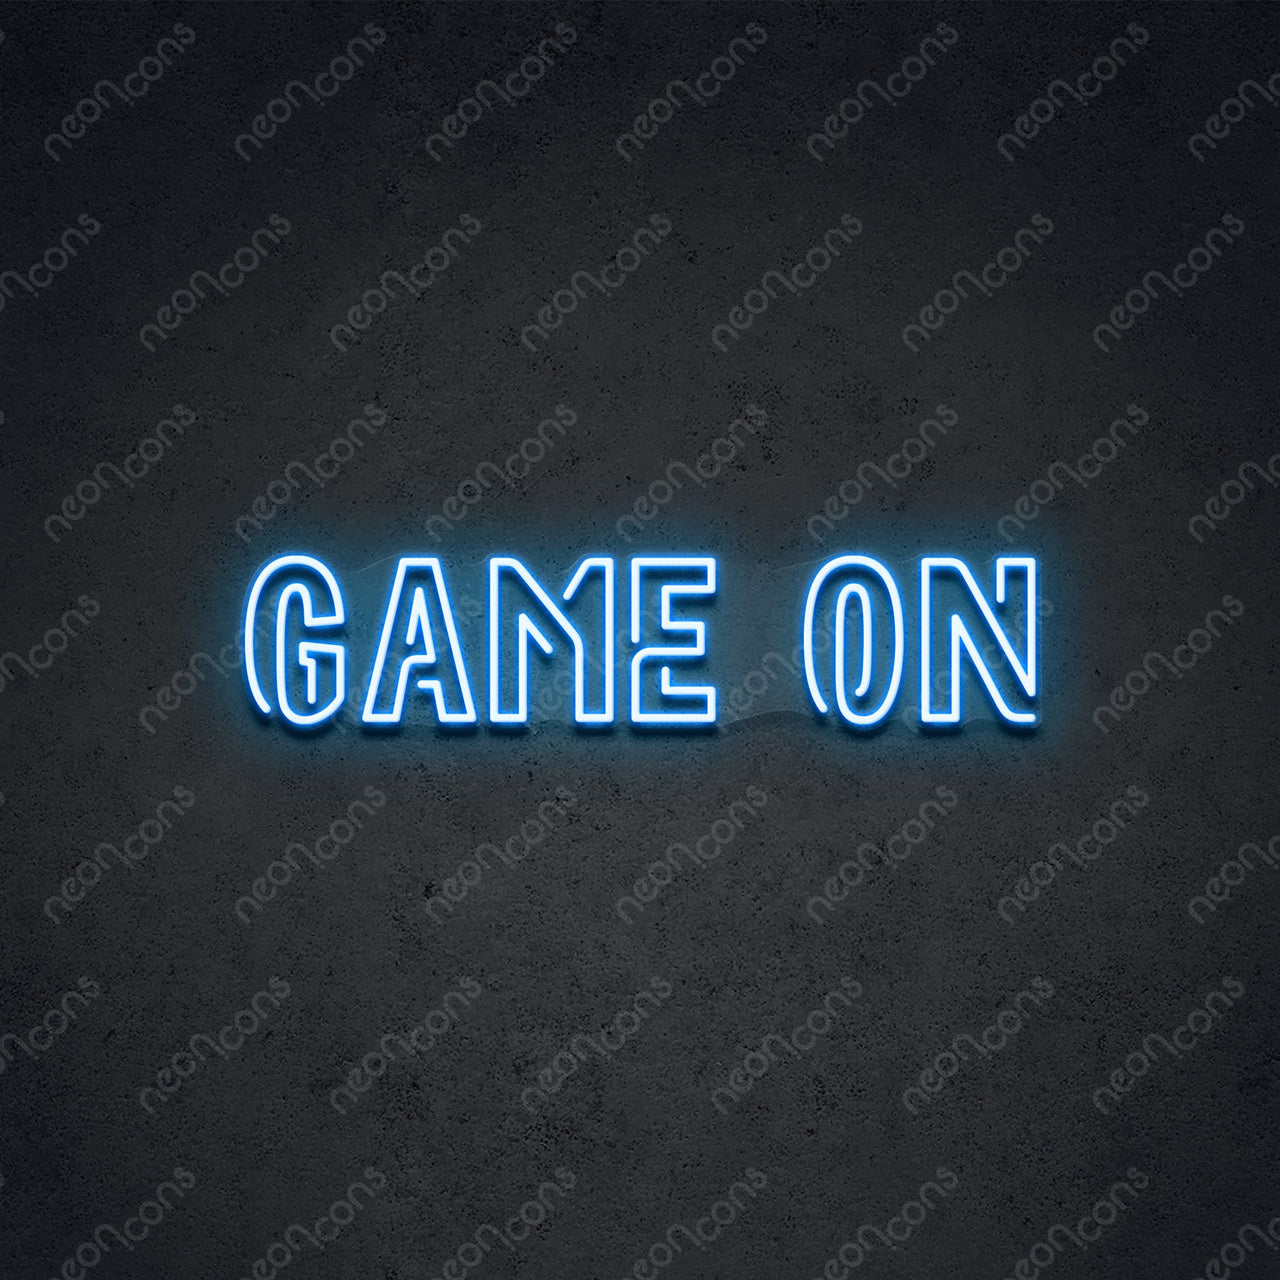 "Game On" Neon Sign 2ft x 0.55ft / Ice Blue / LED Neon by Neon Icons